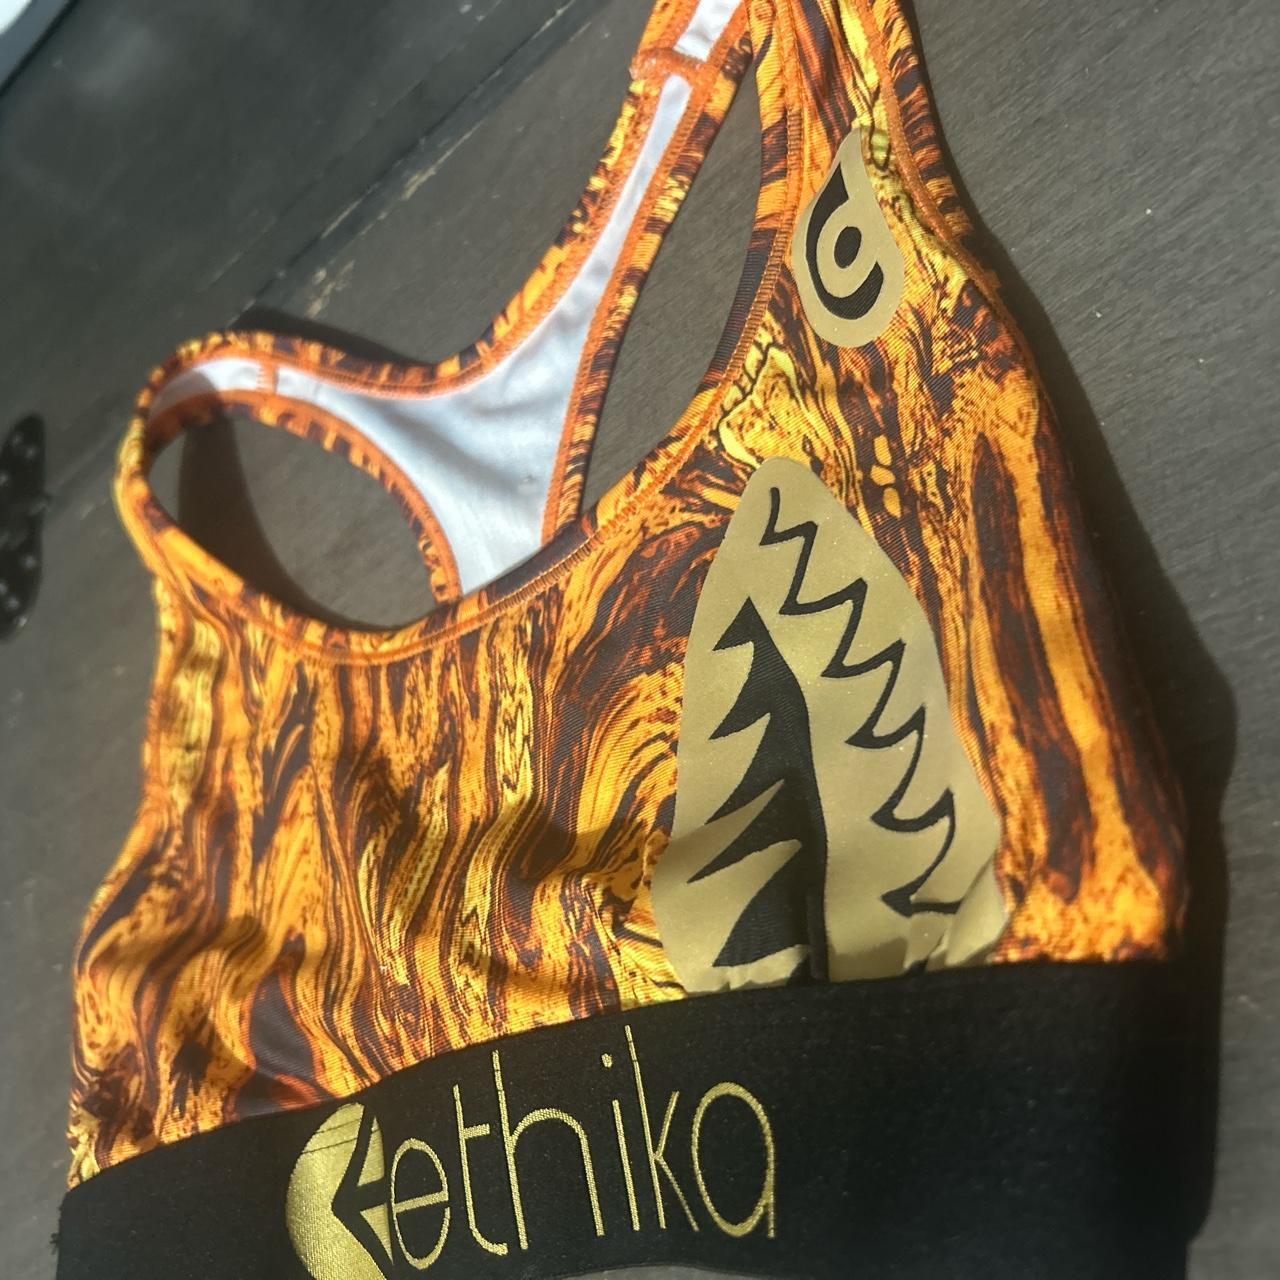 Brand New Ethika Sports Bra in a size Extra Small.